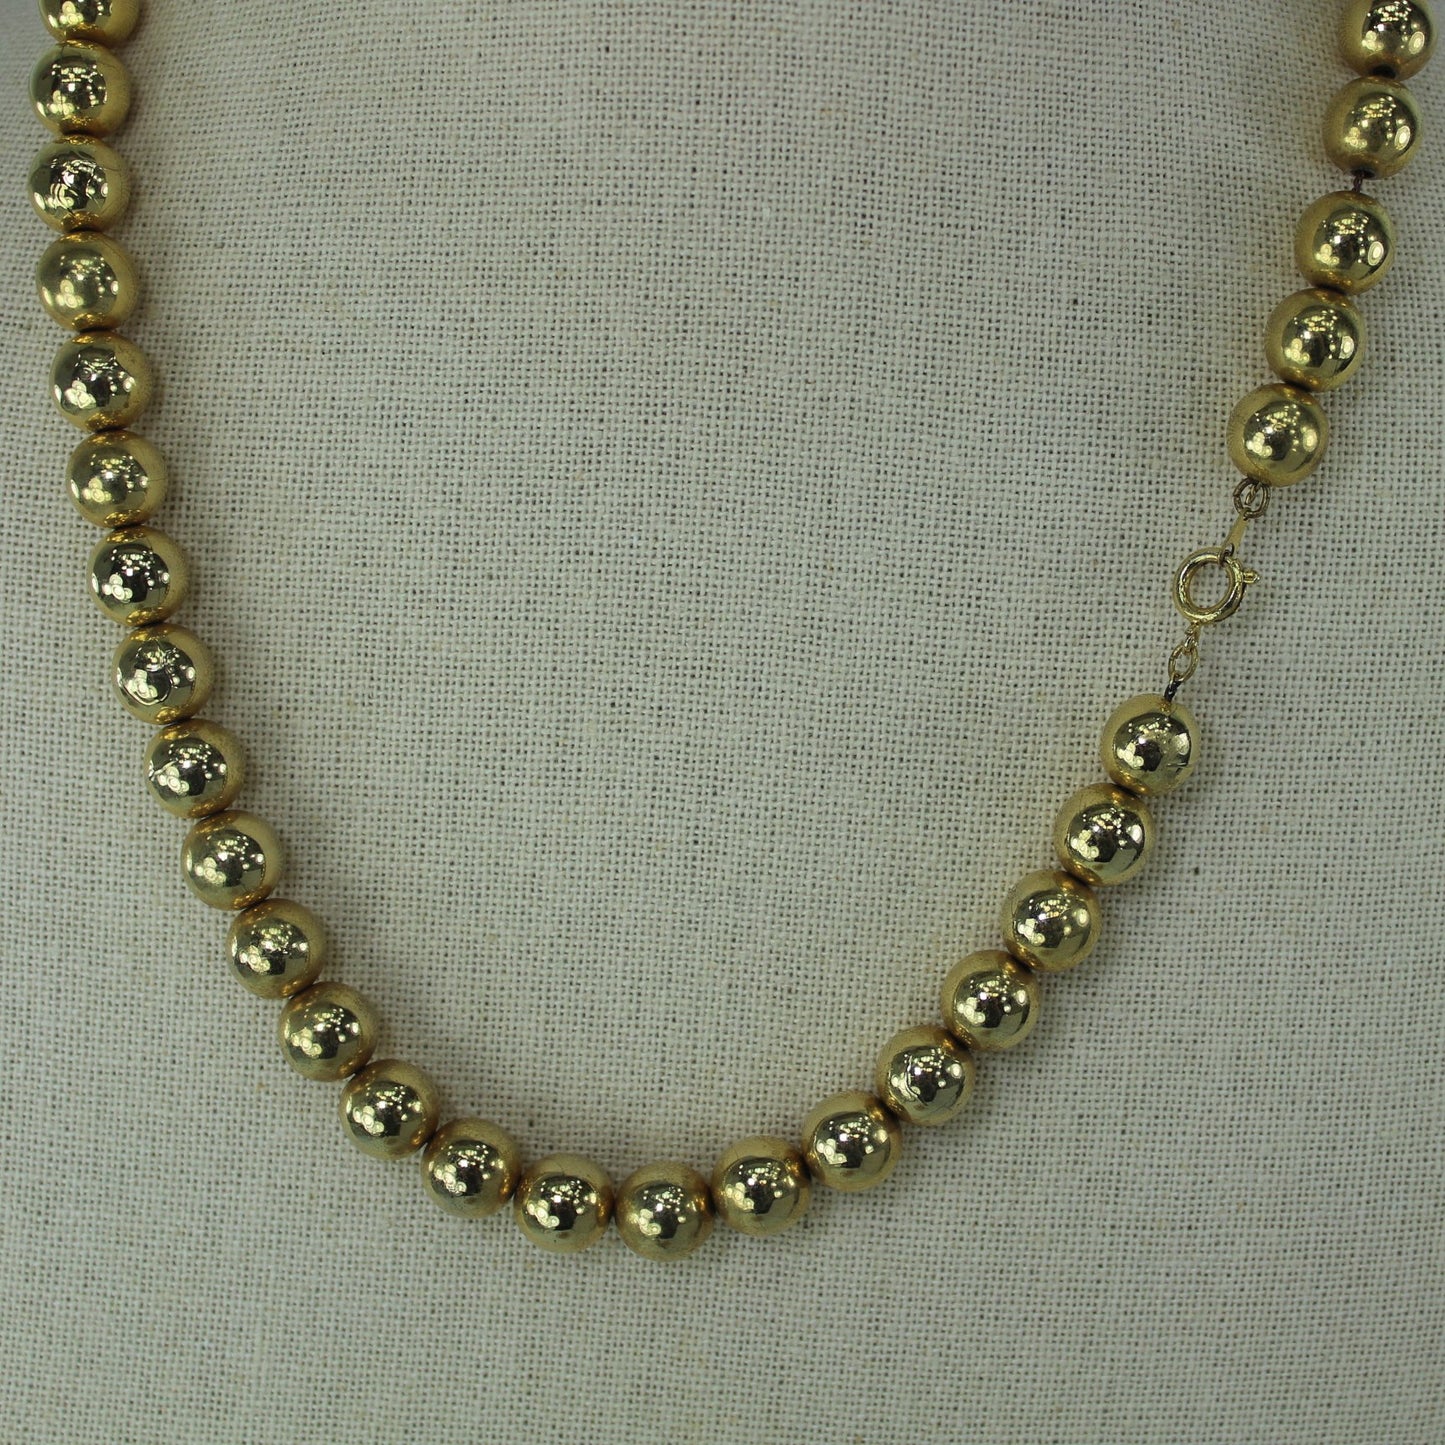 Chain Strung Metal Bead Necklace Bright Gold Tone Vintage 22" 10MM closeup beads and closure